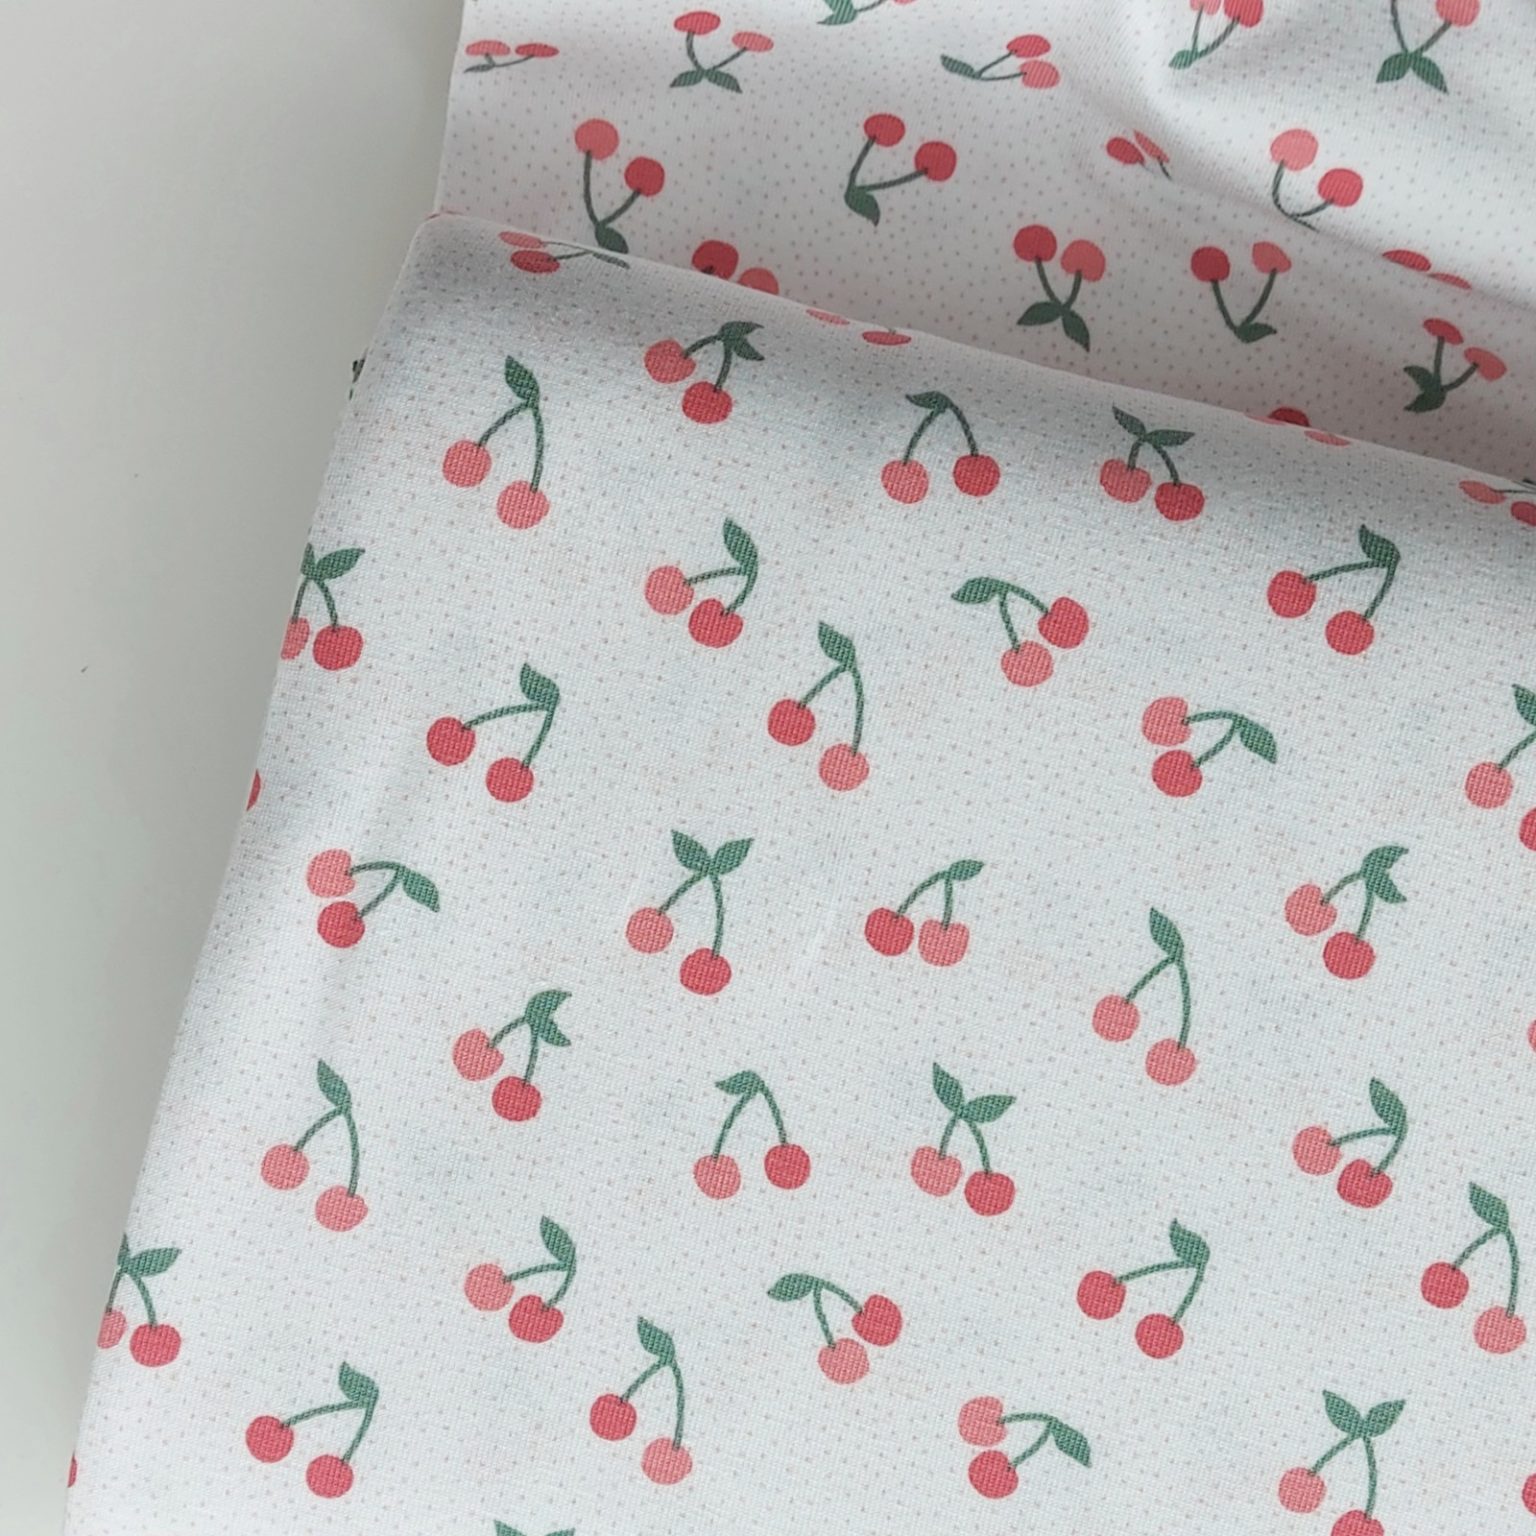 Cherry on White Cotton Organic Jersey Fabric | More Sewing